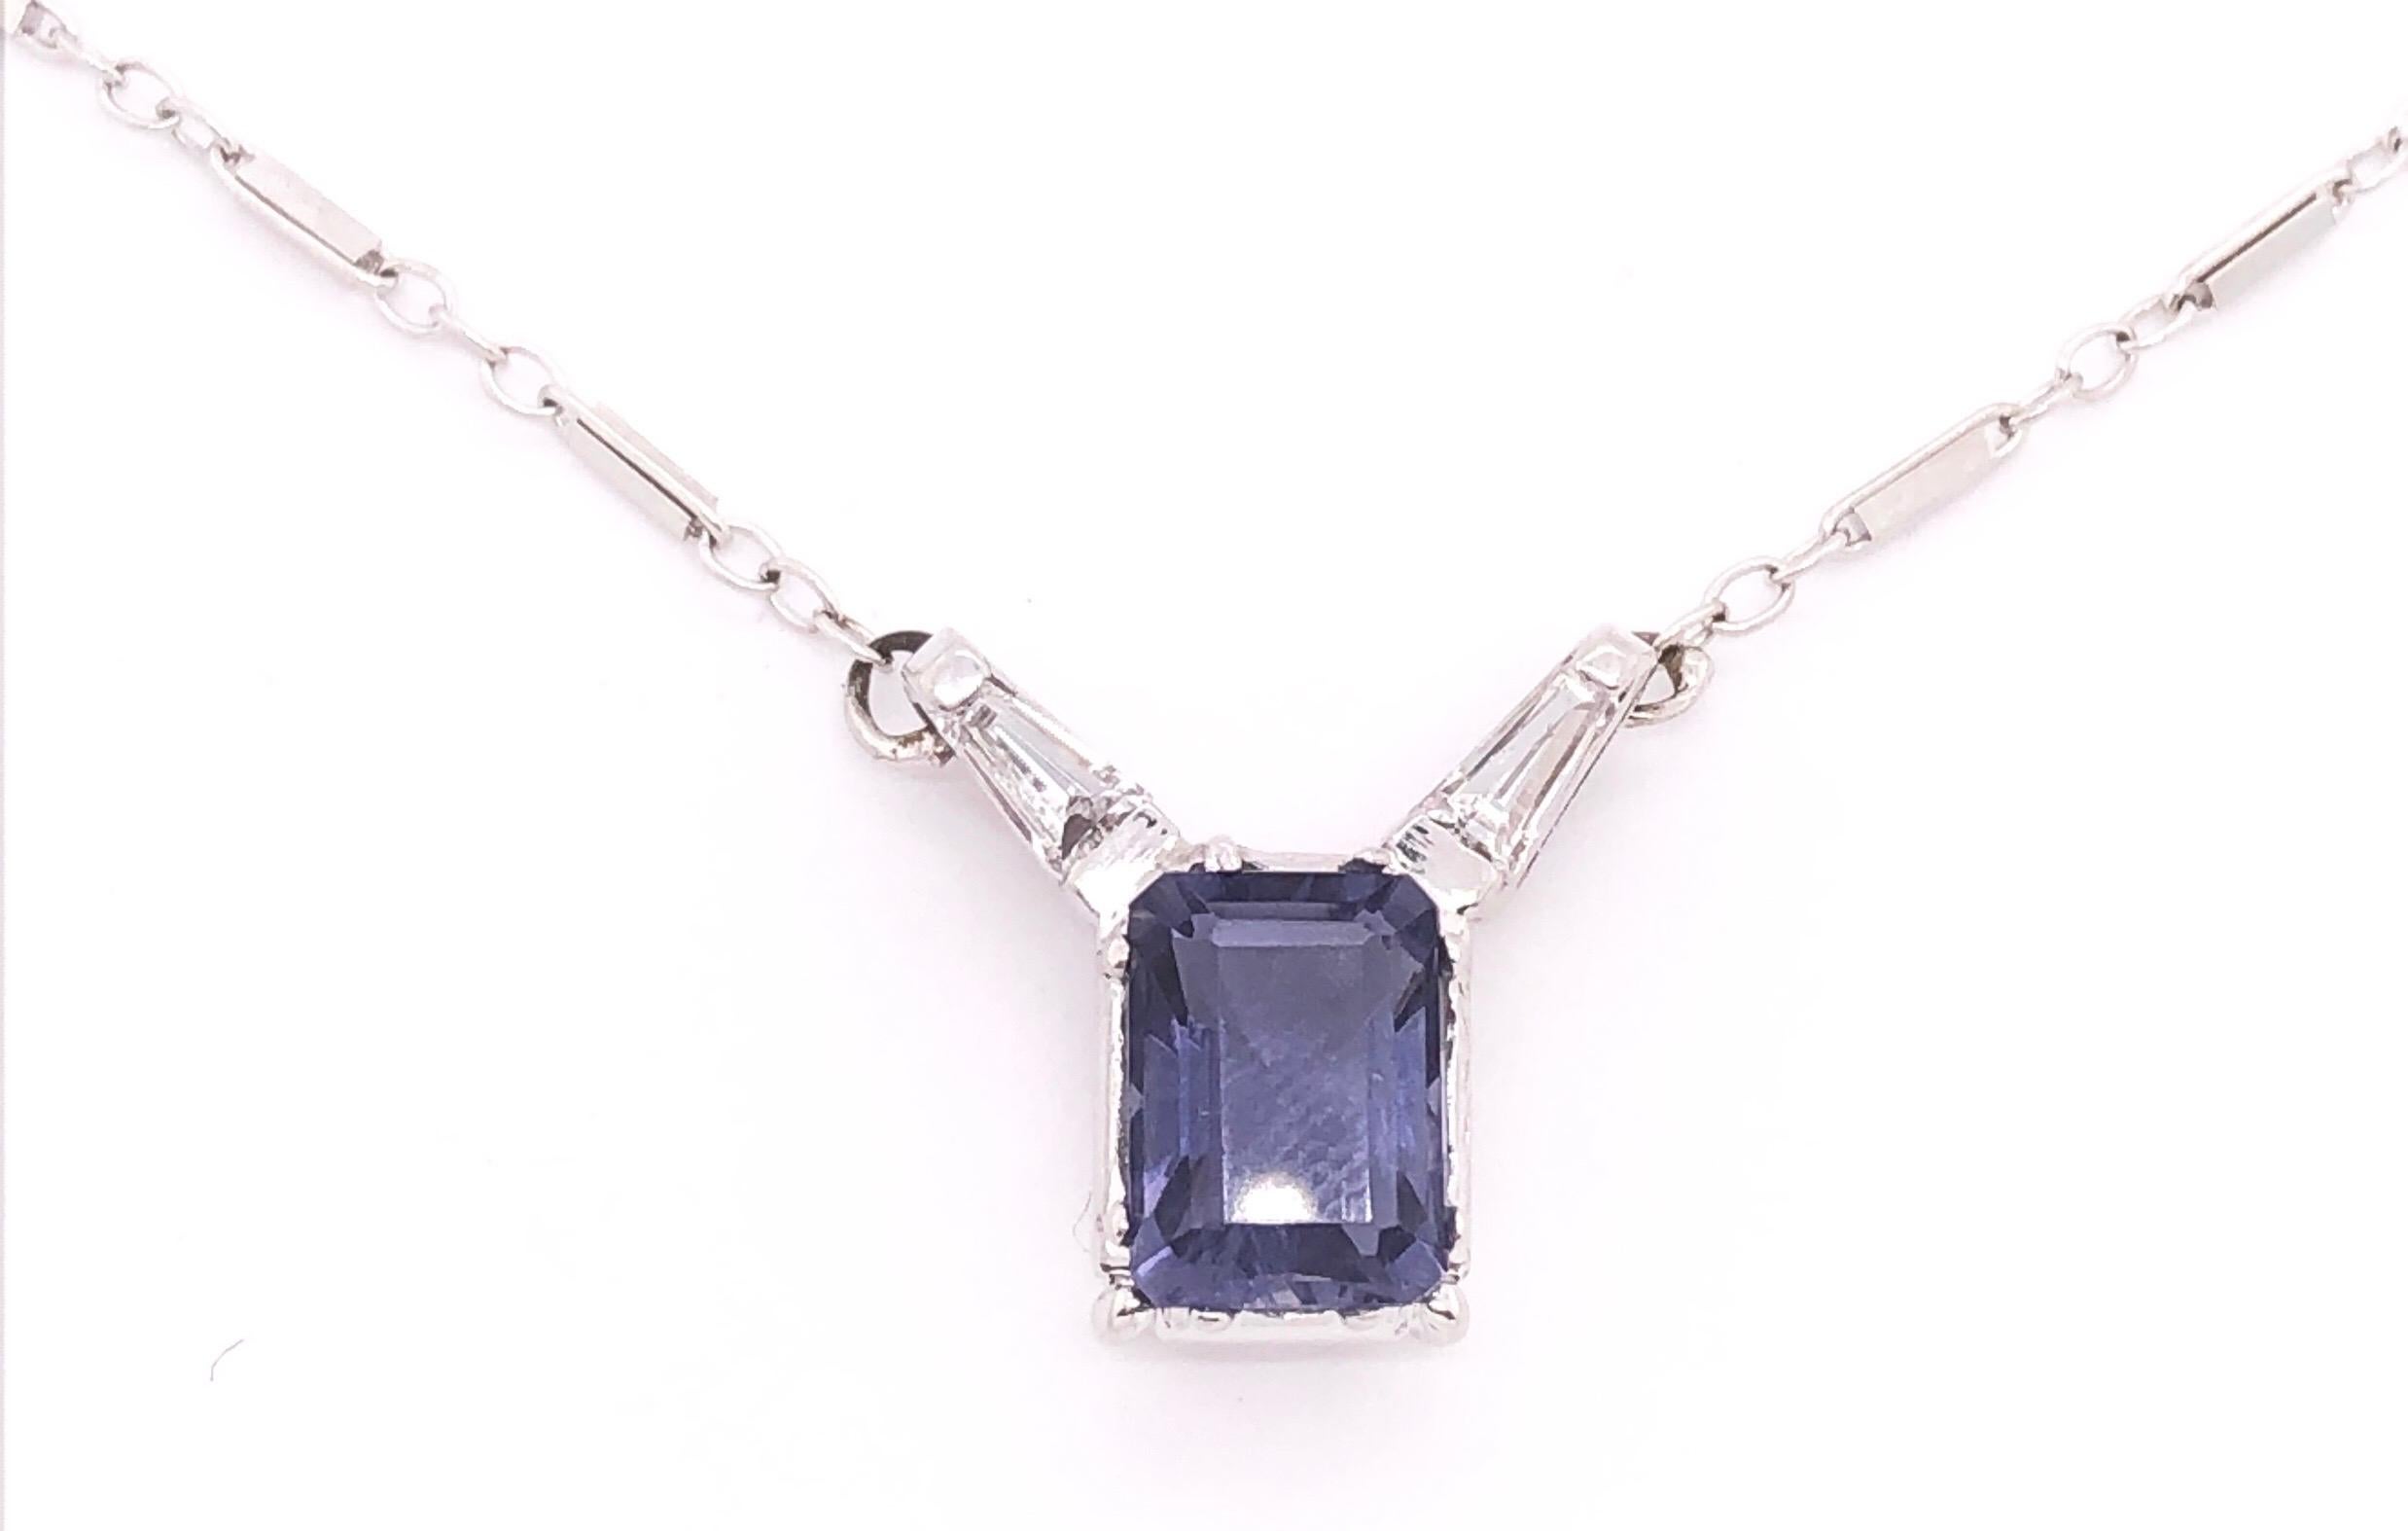 14 Karat White Gold 16 Inch Pendant Necklace with One Square Cushion Tanzannite and Baguette Diamonds
0.25 total diamond weight.
3.48 grams total weight.